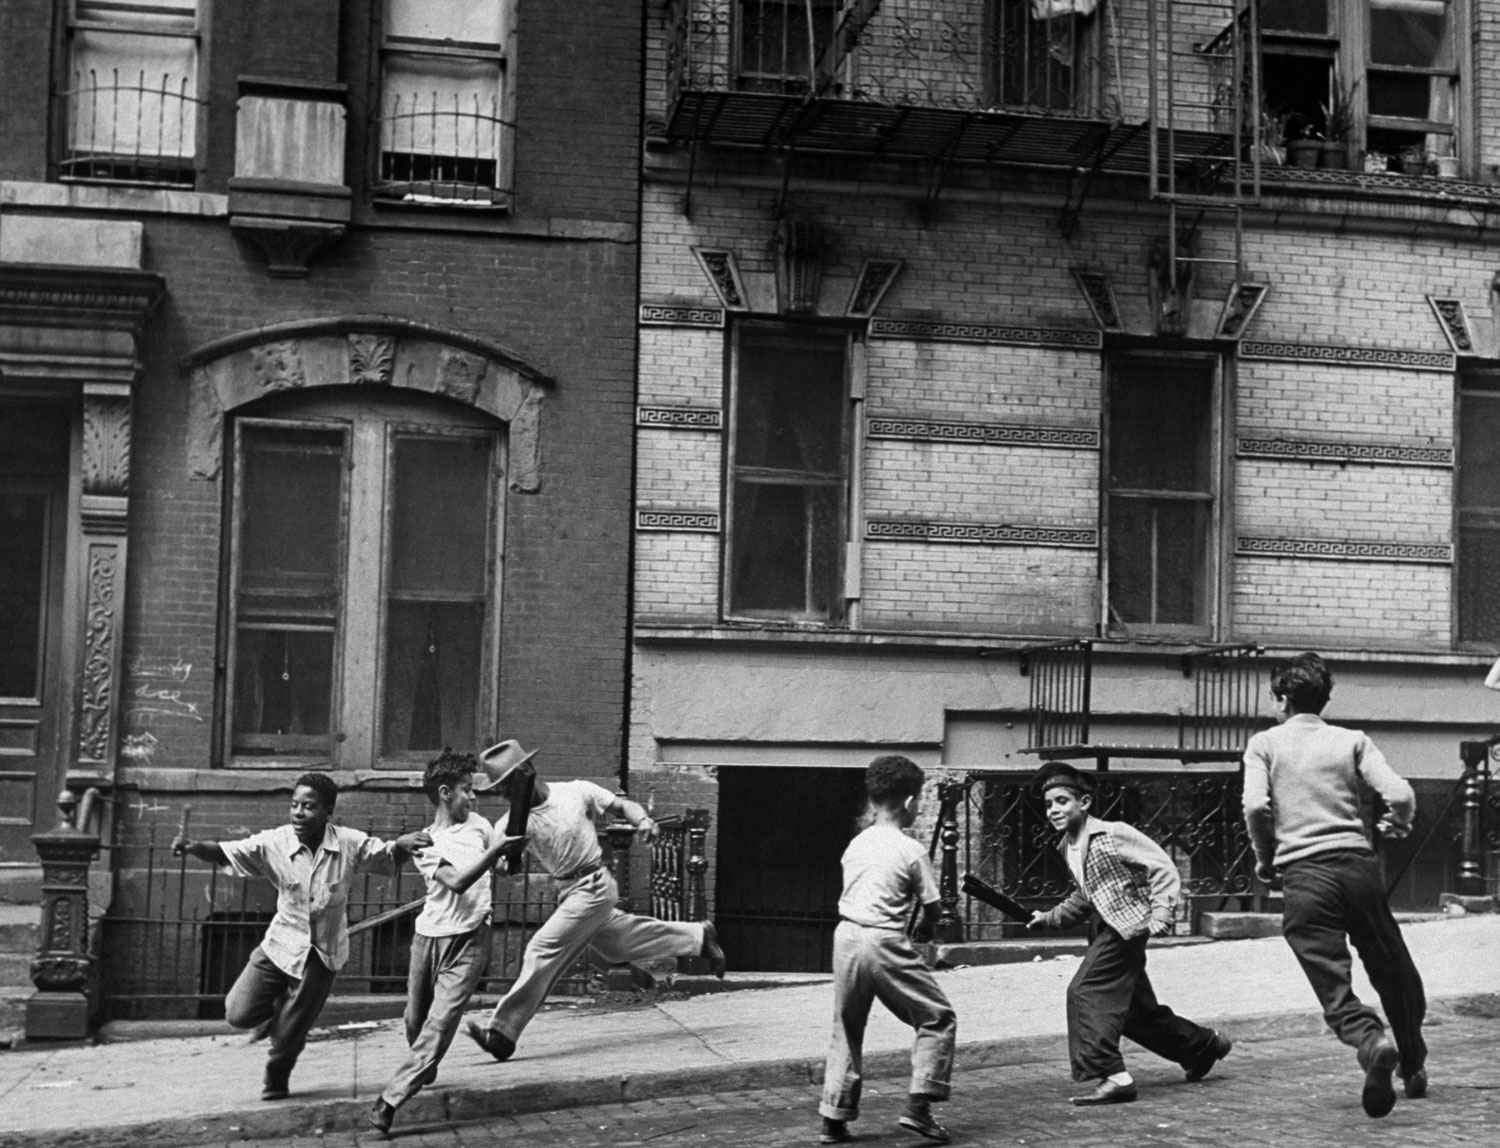 Young boys with sticks run around while playing a street game in Spanish Harlem in January 1947.